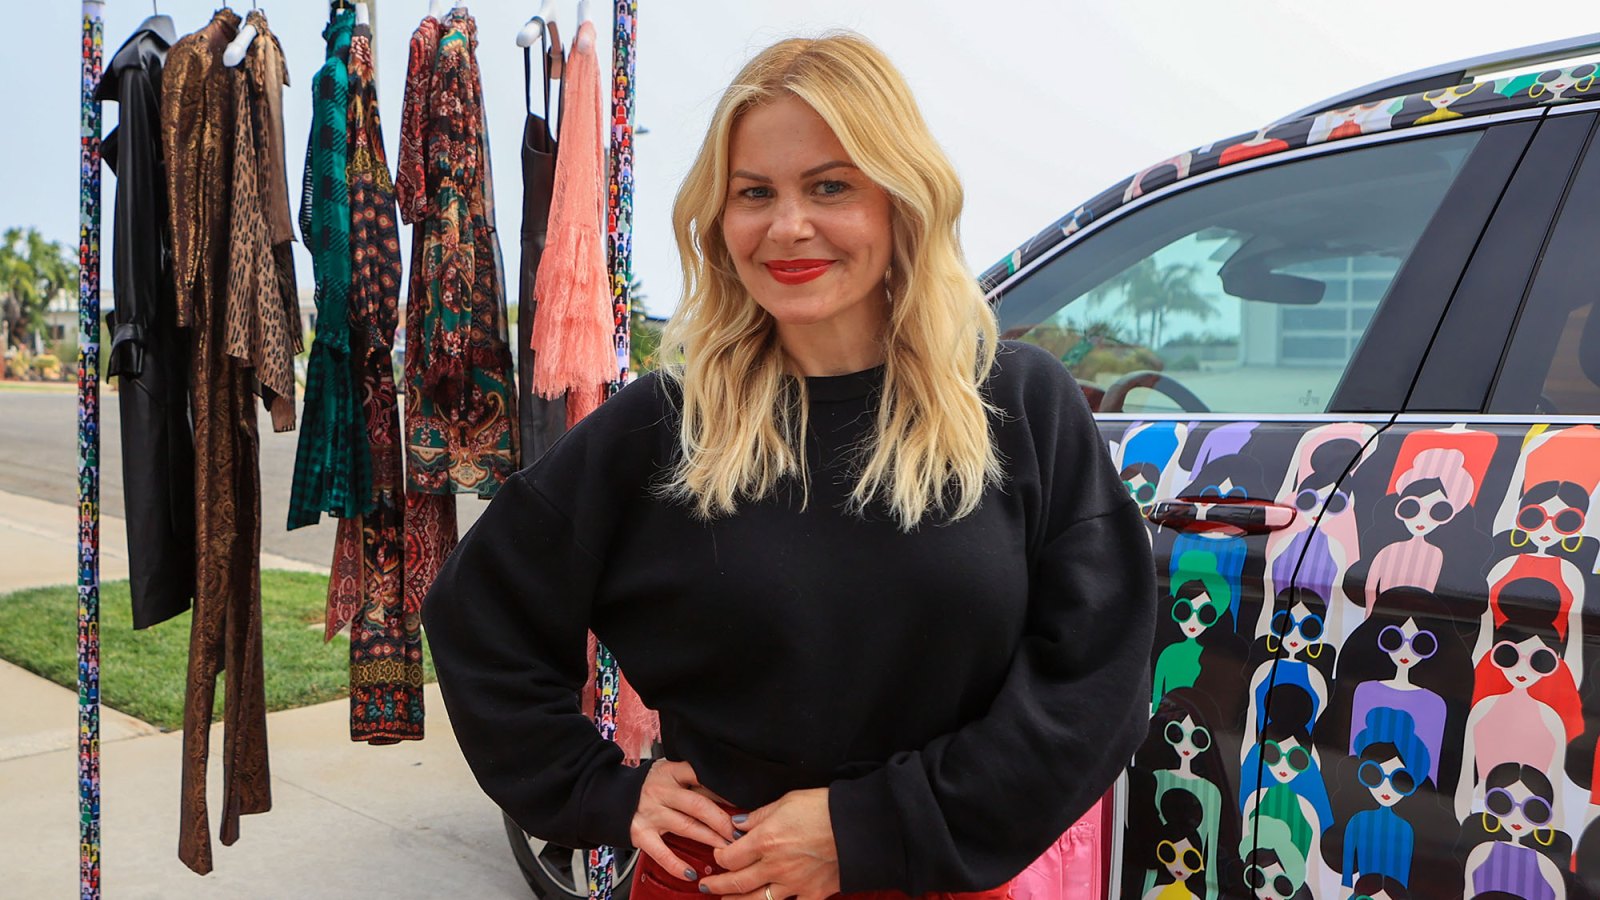 Candace Cameron Bure experiences the Alice + Olivia by Stacey Bendet & Volkswagen mobile gifting suite in Los Angeles